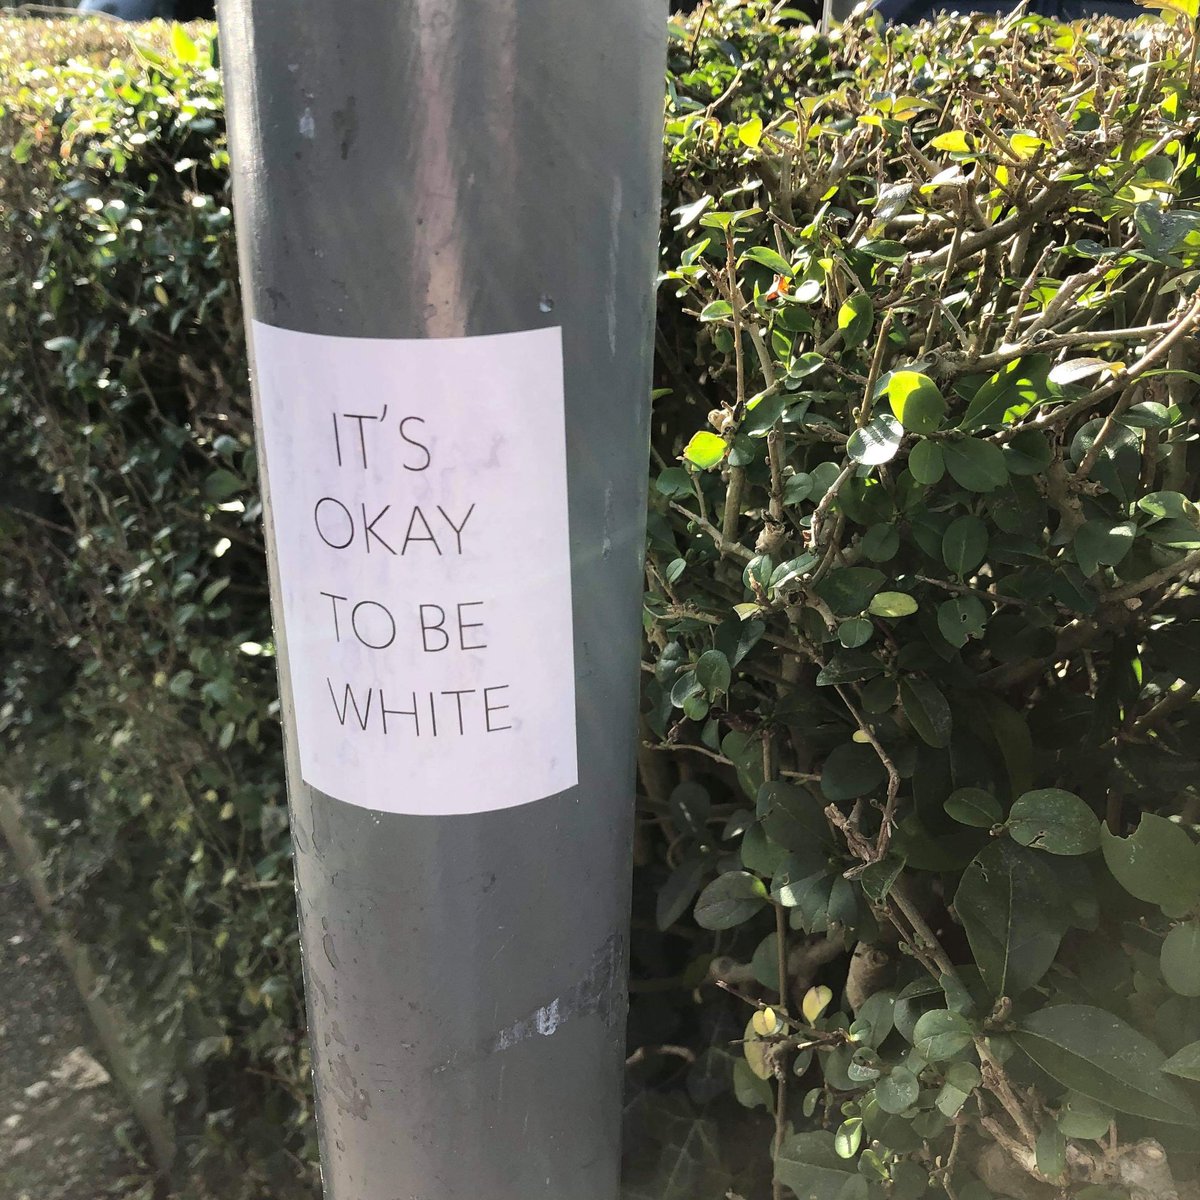 1/6 The BME Network is horrified to see that posters have been put up all over campus that say "it's okay to be white".This phrase seems innocent on the surface, but in reality, it is a popular dogwhistle among white supremacists.